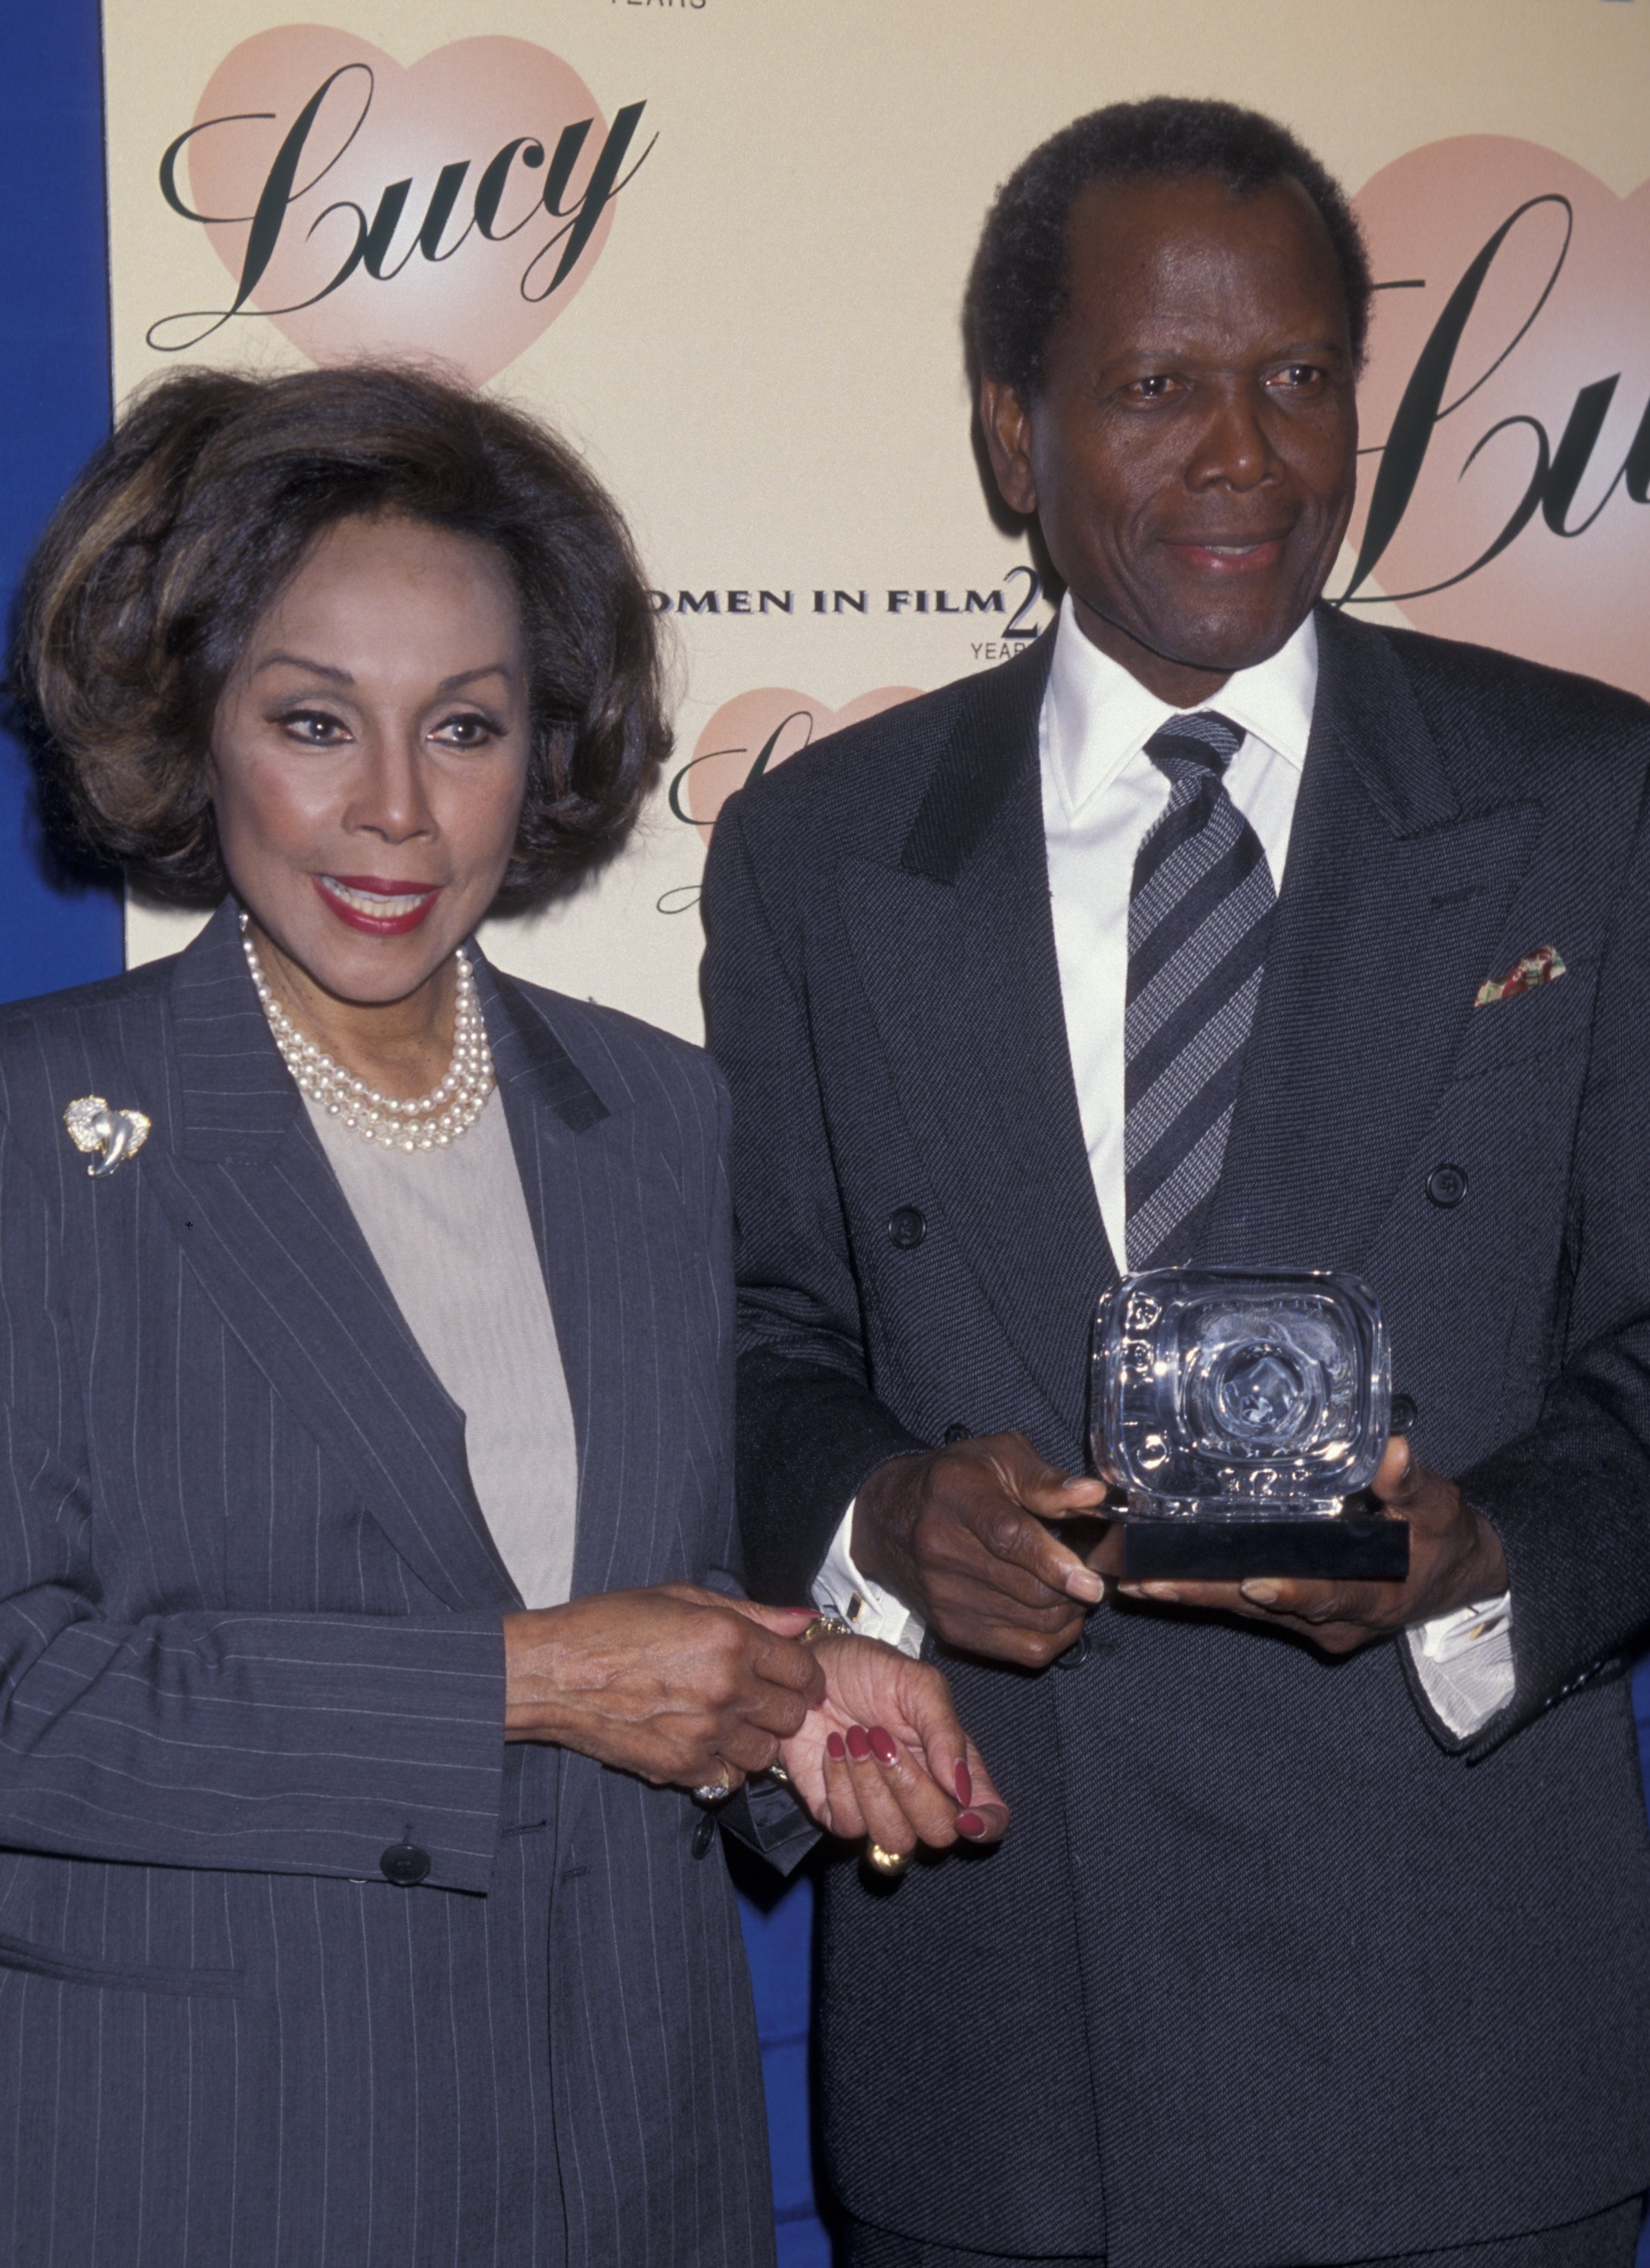  Diahann Carroll and Sidney Poitier a the Fifth Annual Women in Film Lucy Awards on September 12, 1998 in Beverly Hills, California | Photo: Getty Images